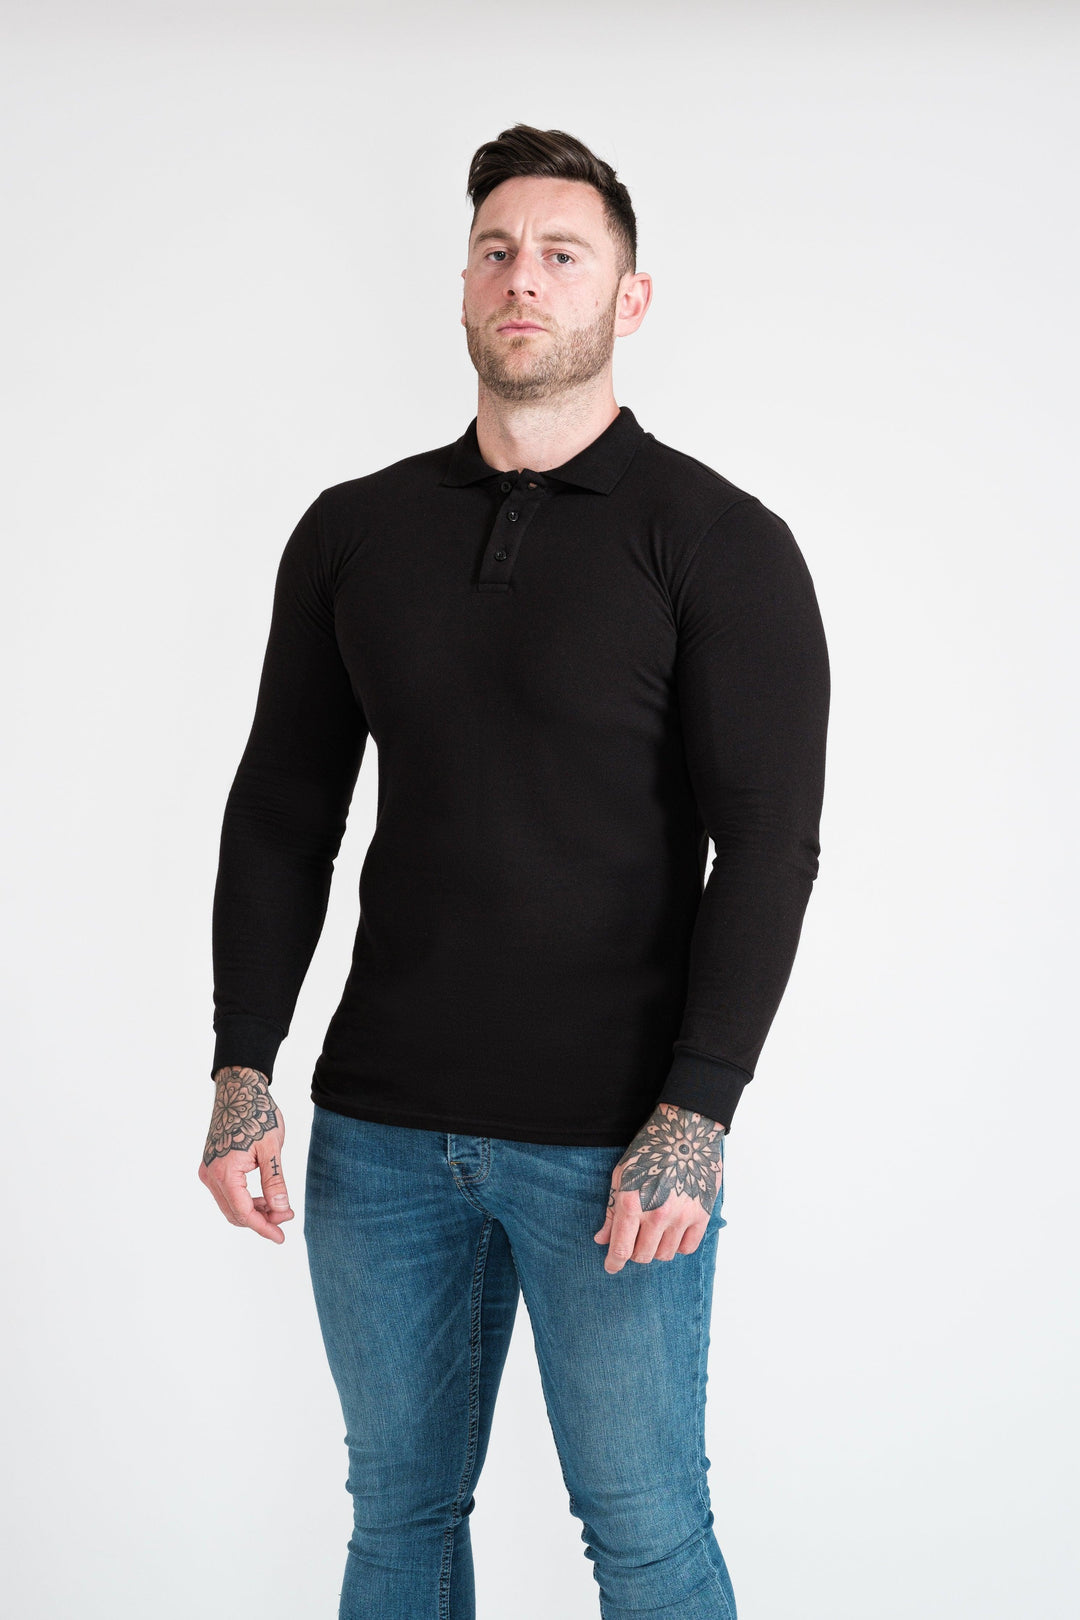 Mens Black Tapered Fit Polo Shirt. A Proportionally Fitted and Muscle Fit Polo Shirt. The best polo shirts for muscular guys.